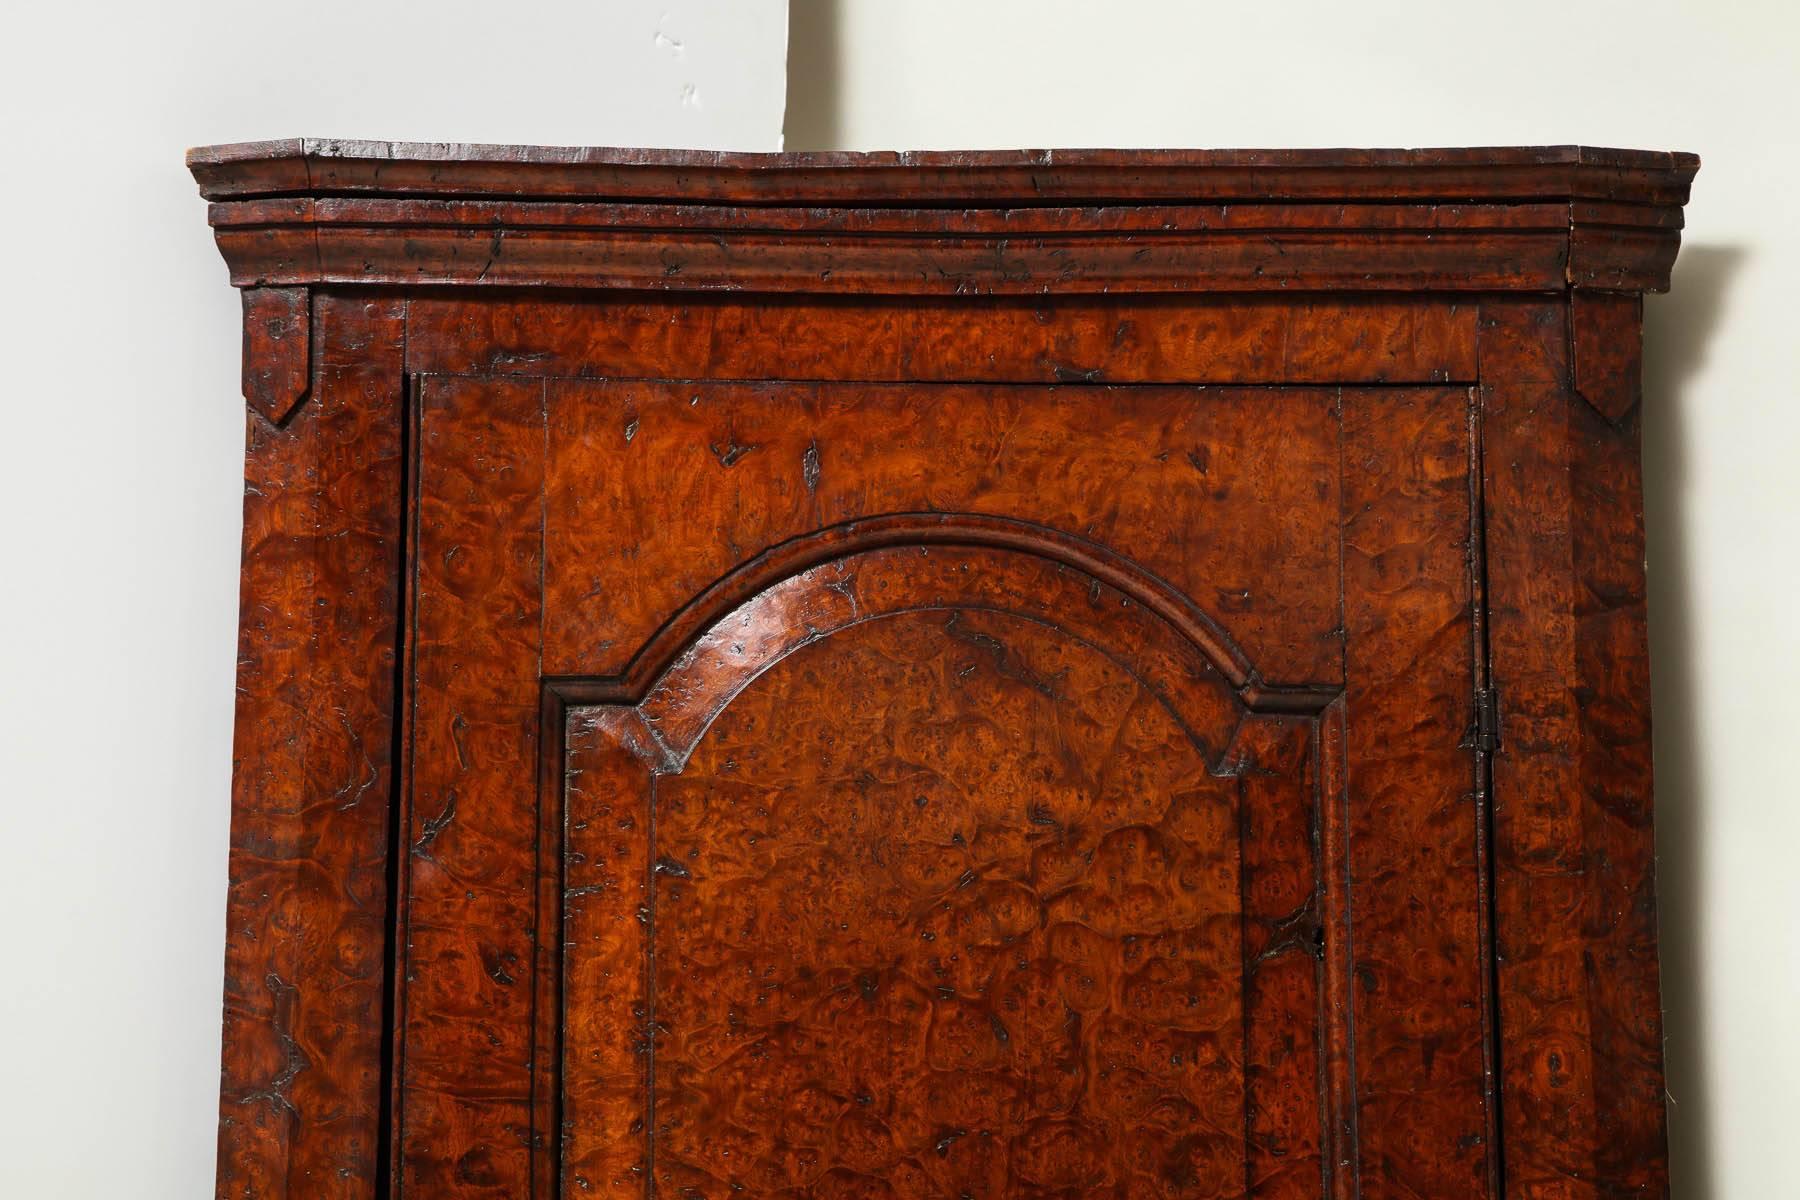 Very fine George II period hanging corner cover constructed of exceptionally grained solid burl elm, having a single door with solid arched raised panel. Interior with cupid bow scalloped shelves. The whole with exceptional graining and